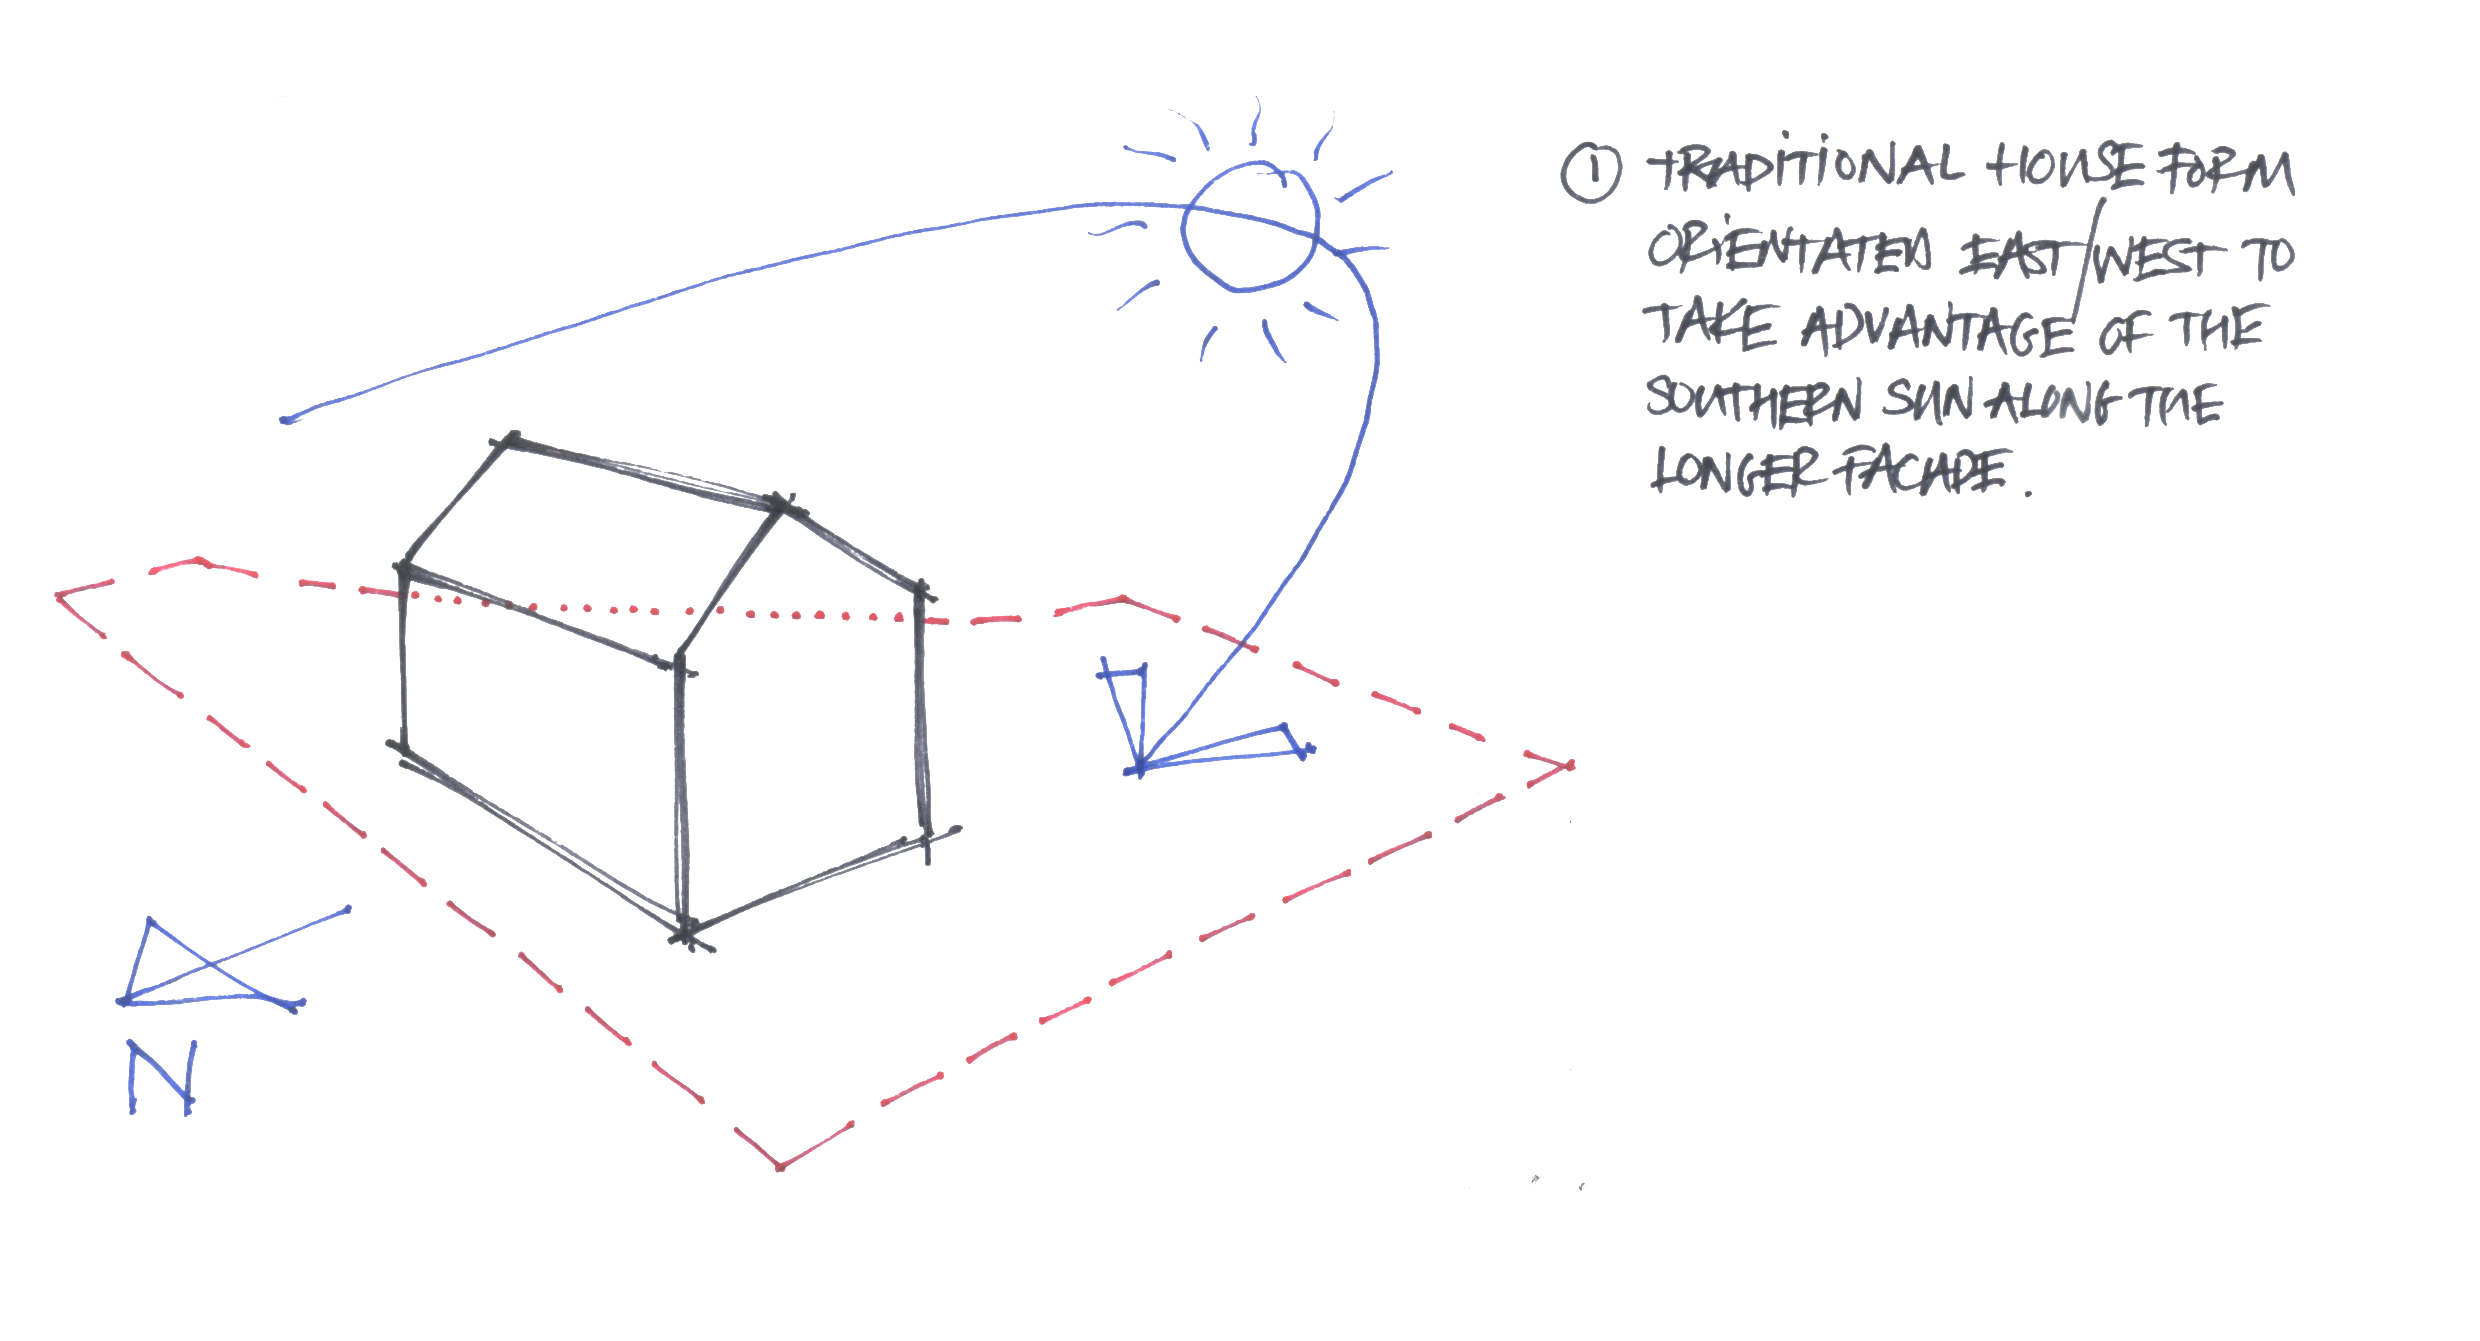 Orientating the house with the sun path